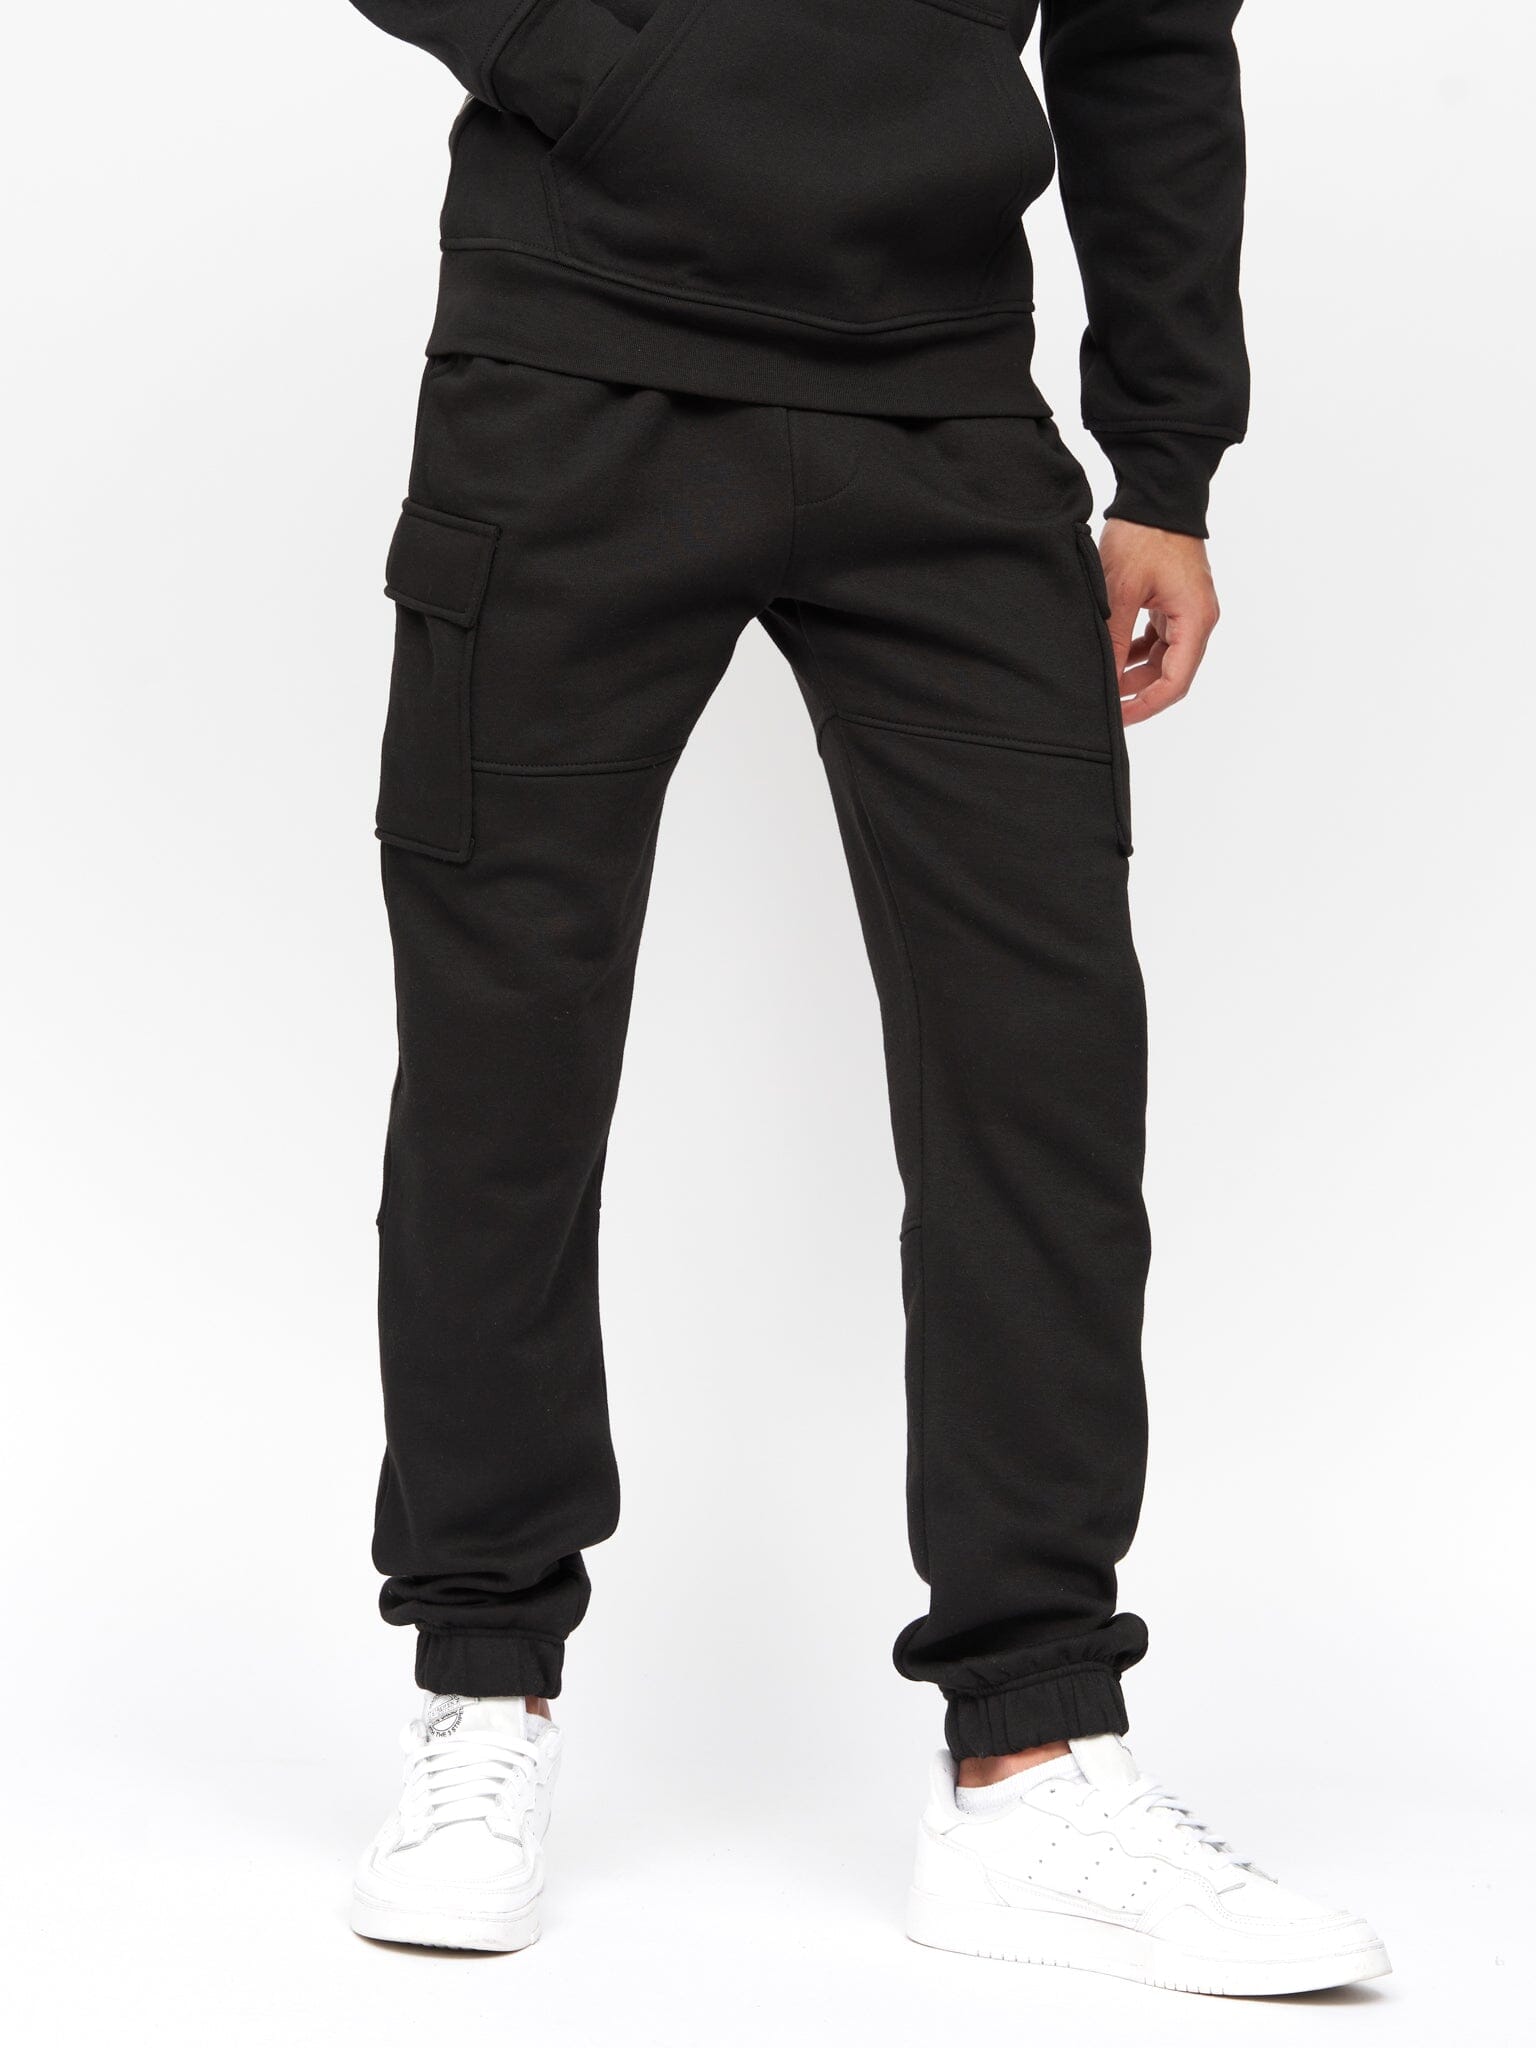 Holdouts Joggers Black